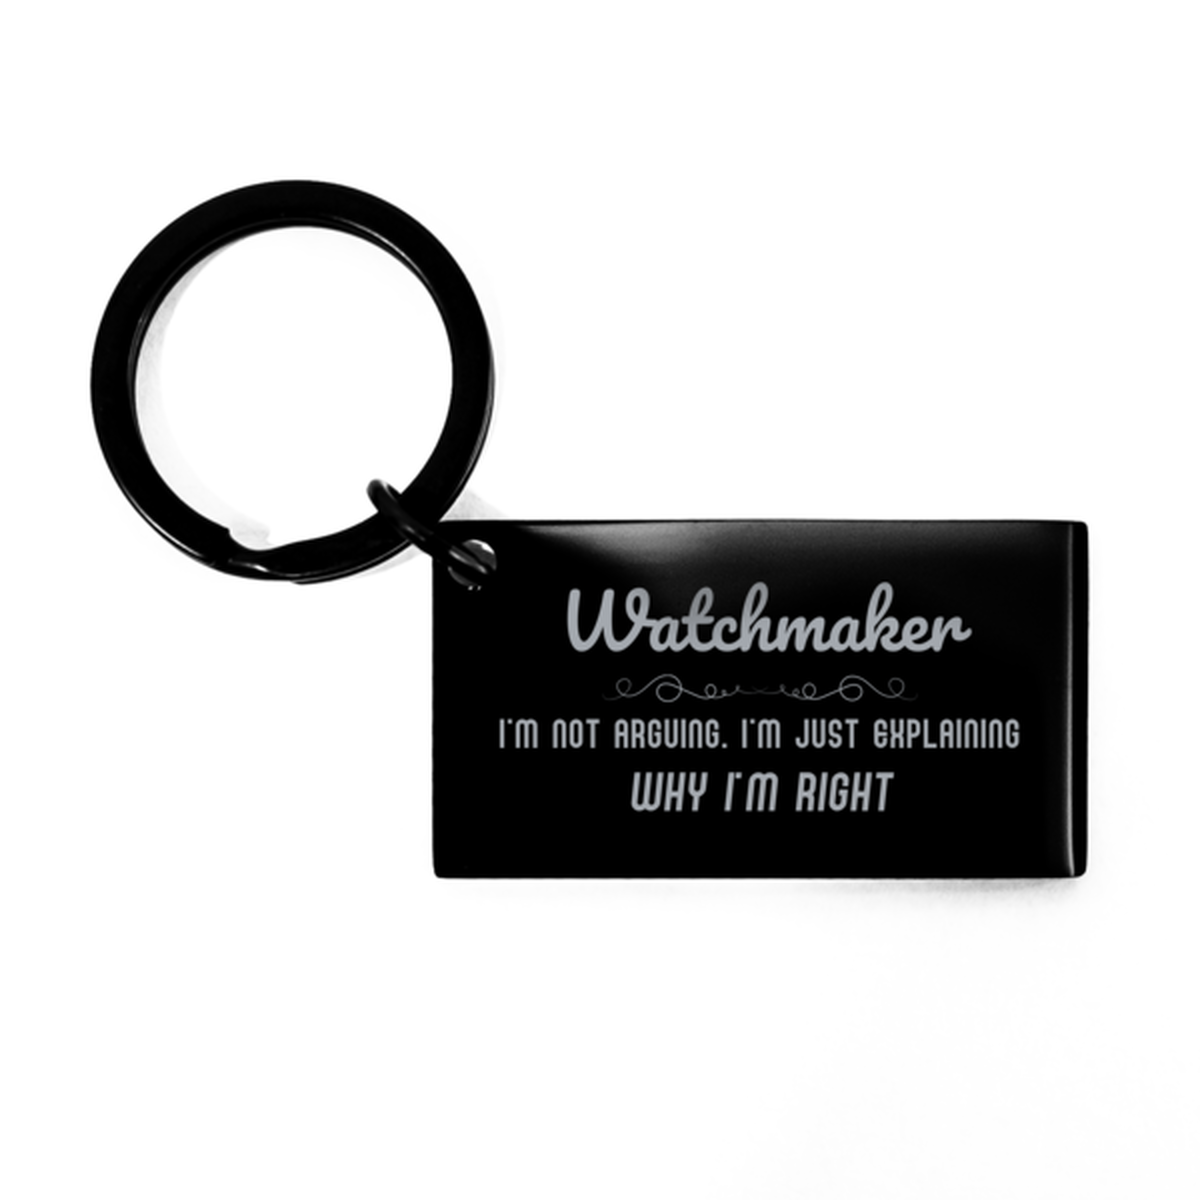 Watchmaker I'm not Arguing. I'm Just Explaining Why I'm RIGHT Keychain, Funny Saying Quote Watchmaker Gifts For Watchmaker Graduation Birthday Christmas Gifts for Men Women Coworker